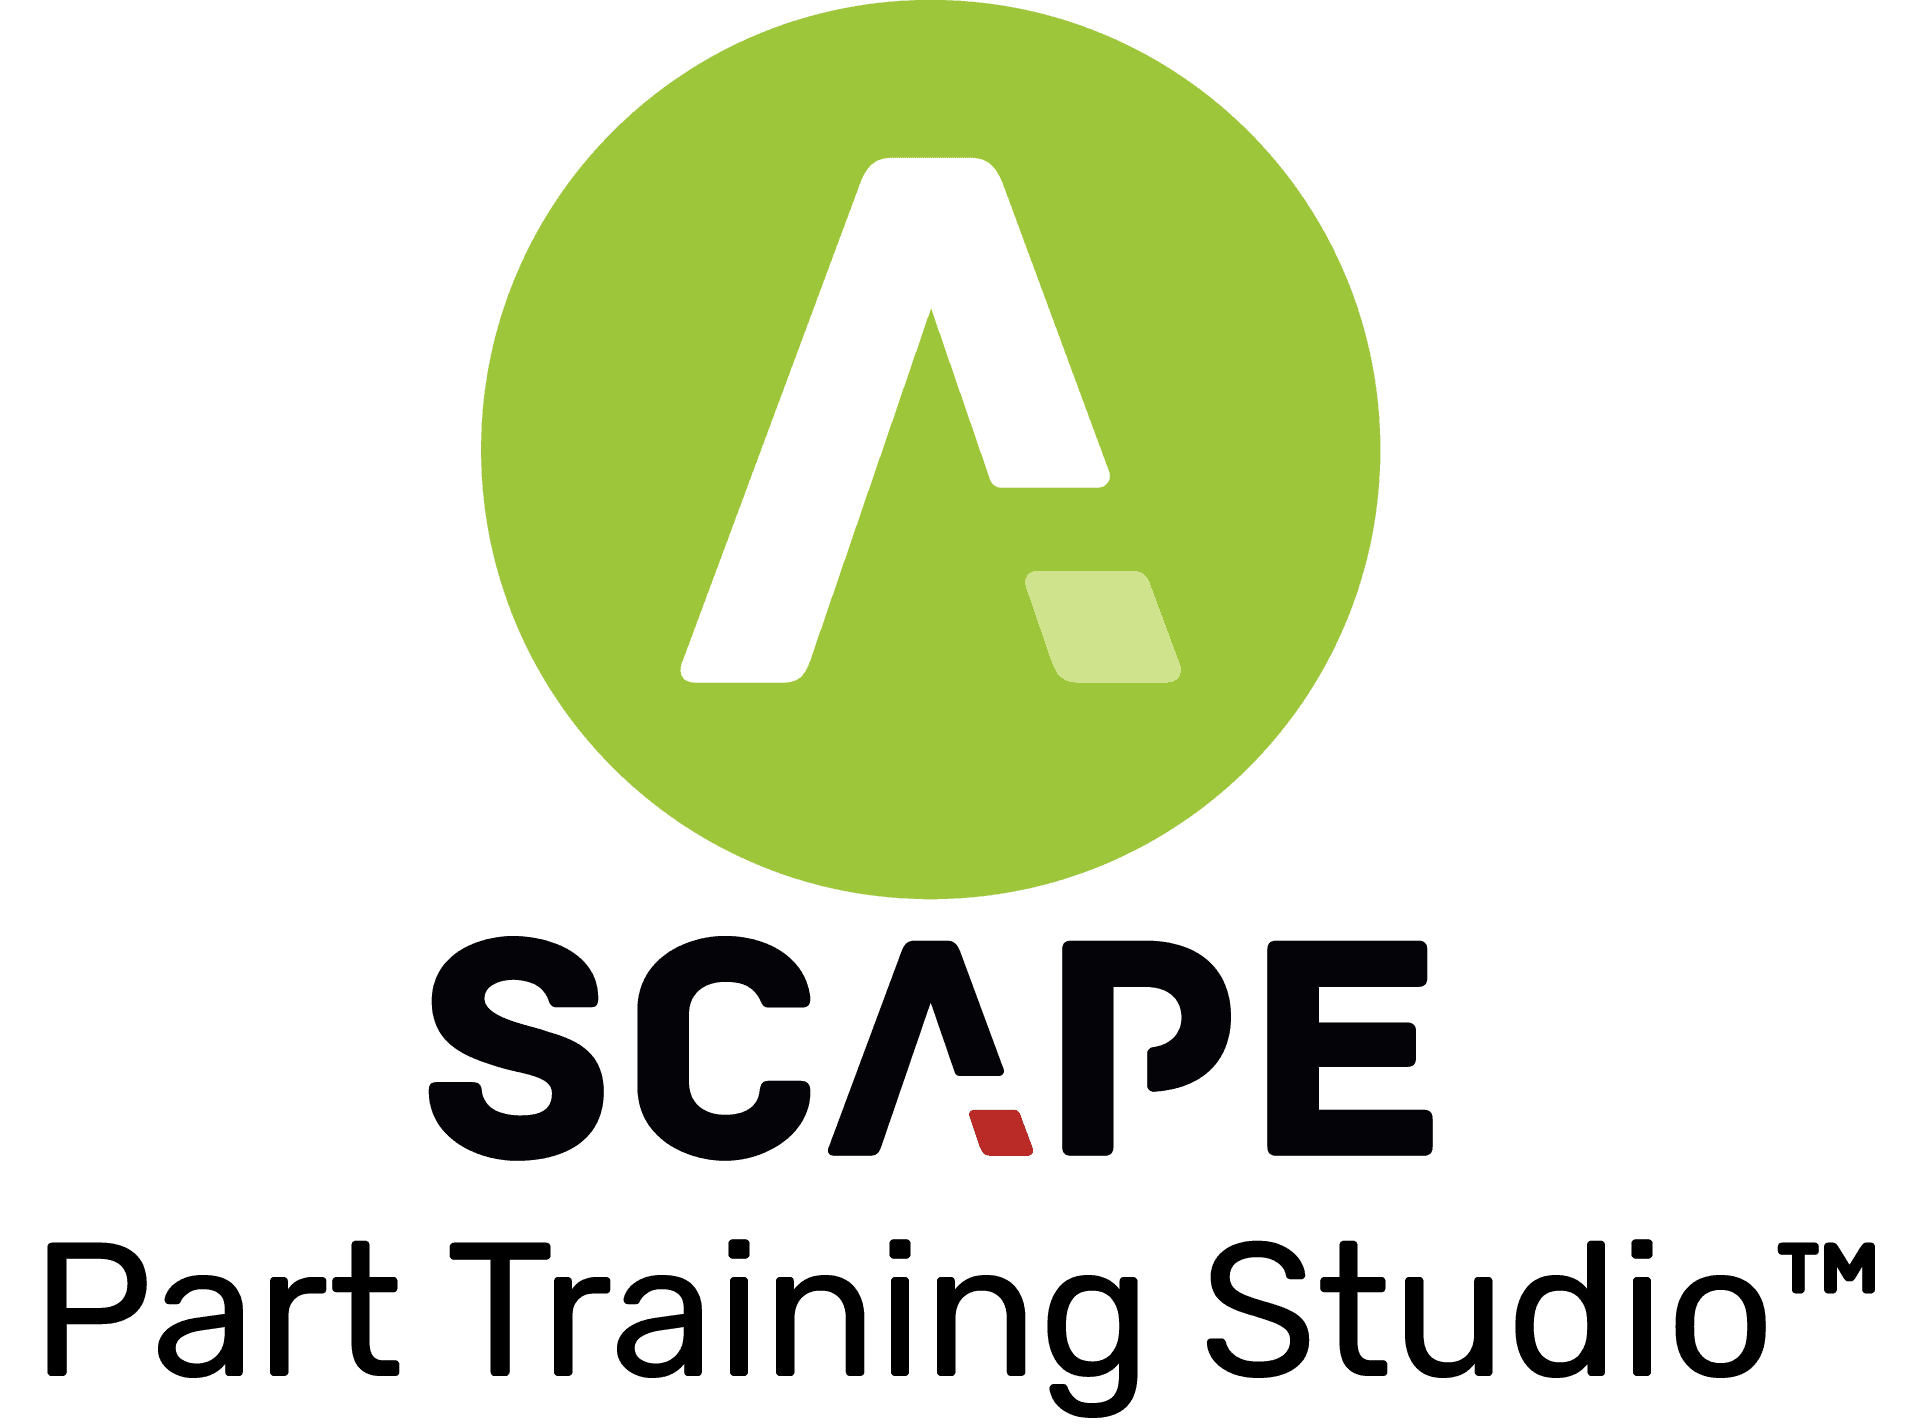 Product SCAPE Part Training Studio | Scape Technologies - The Bin-Picking Company image